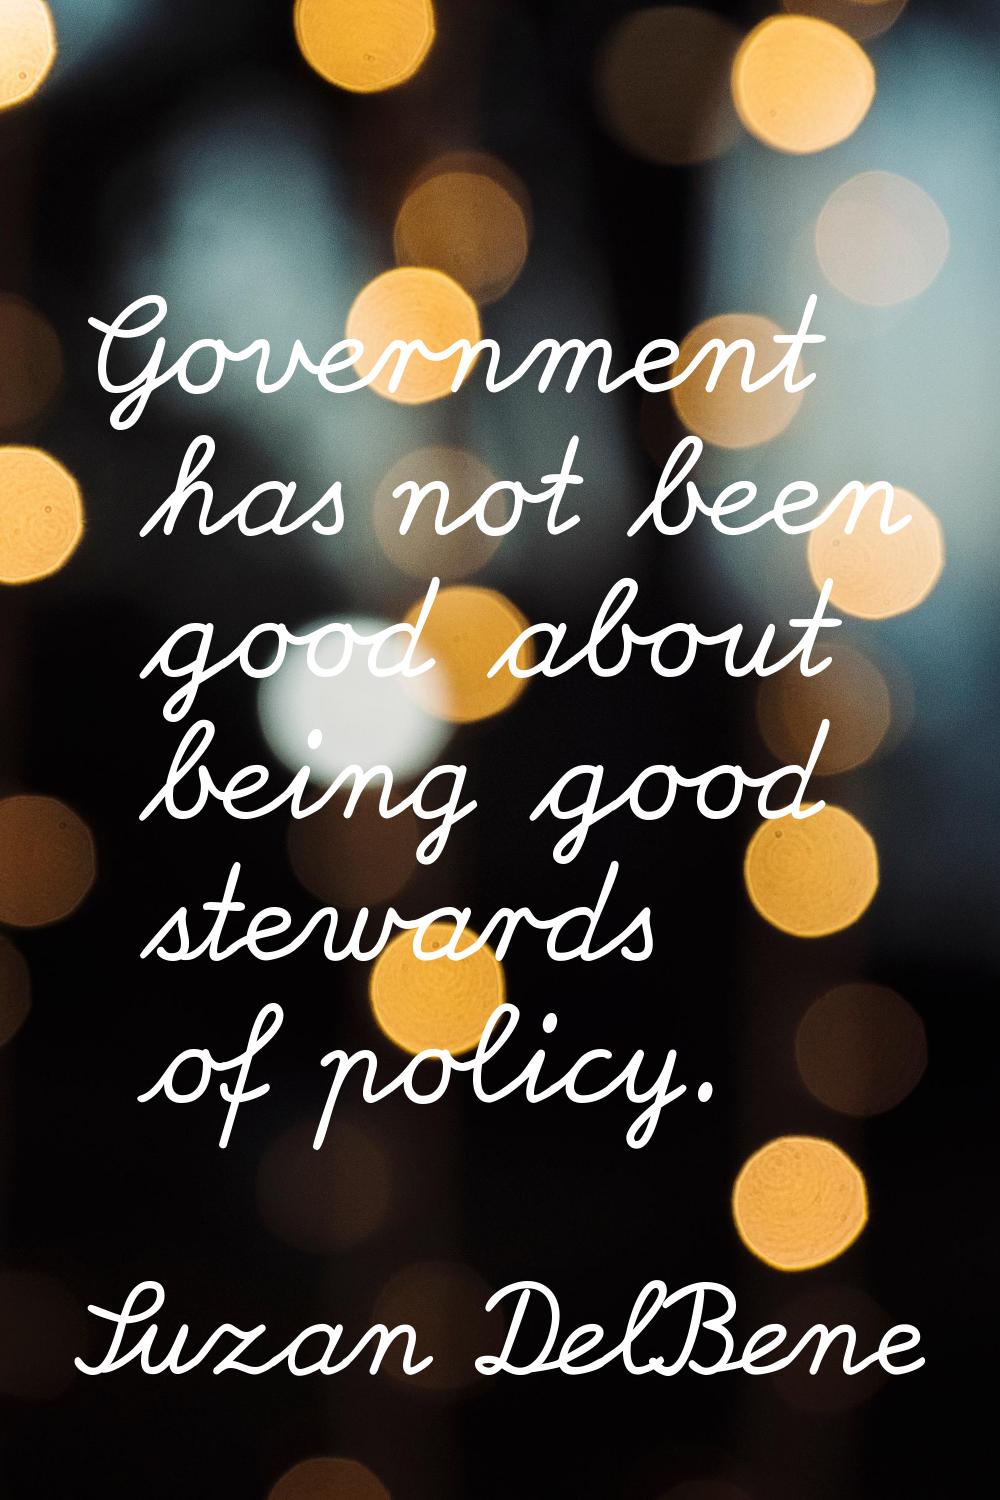 Government has not been good about being good stewards of policy.